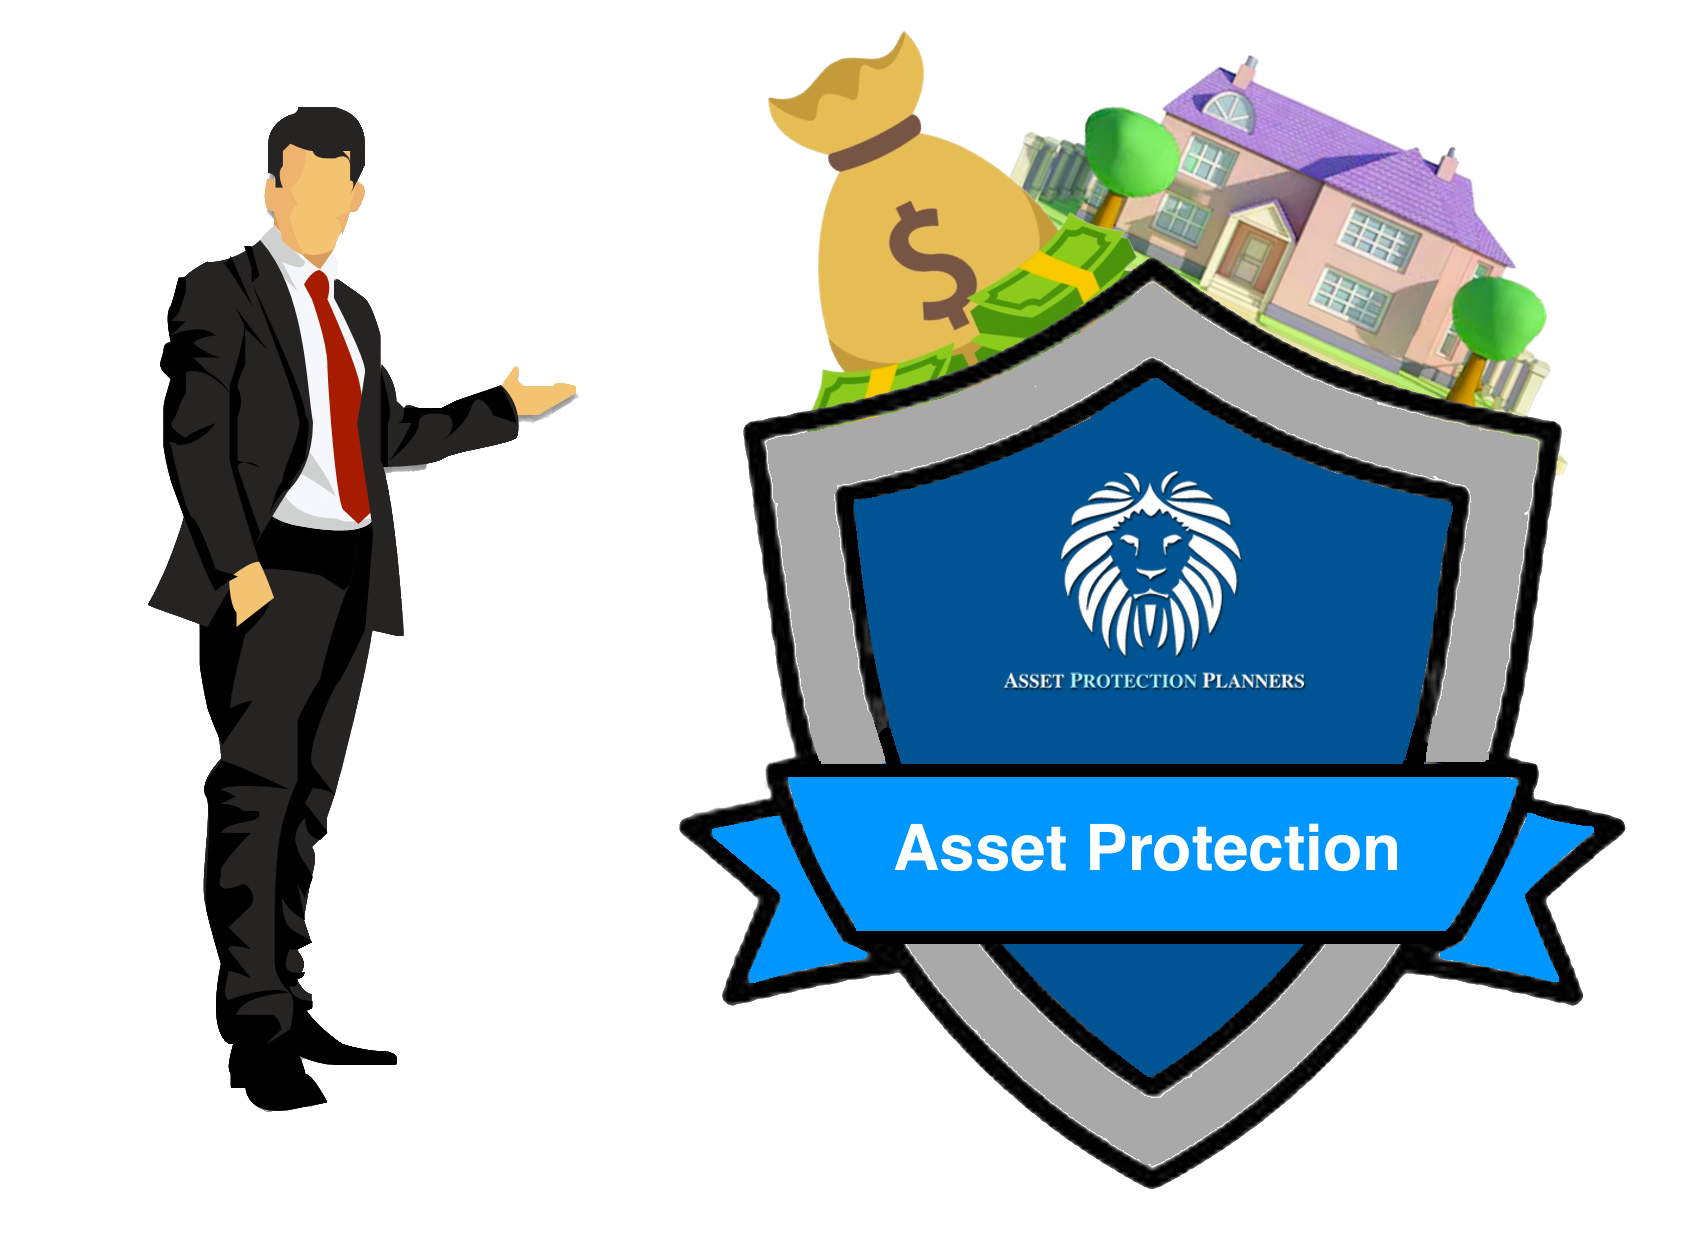 Asset Protection Definition